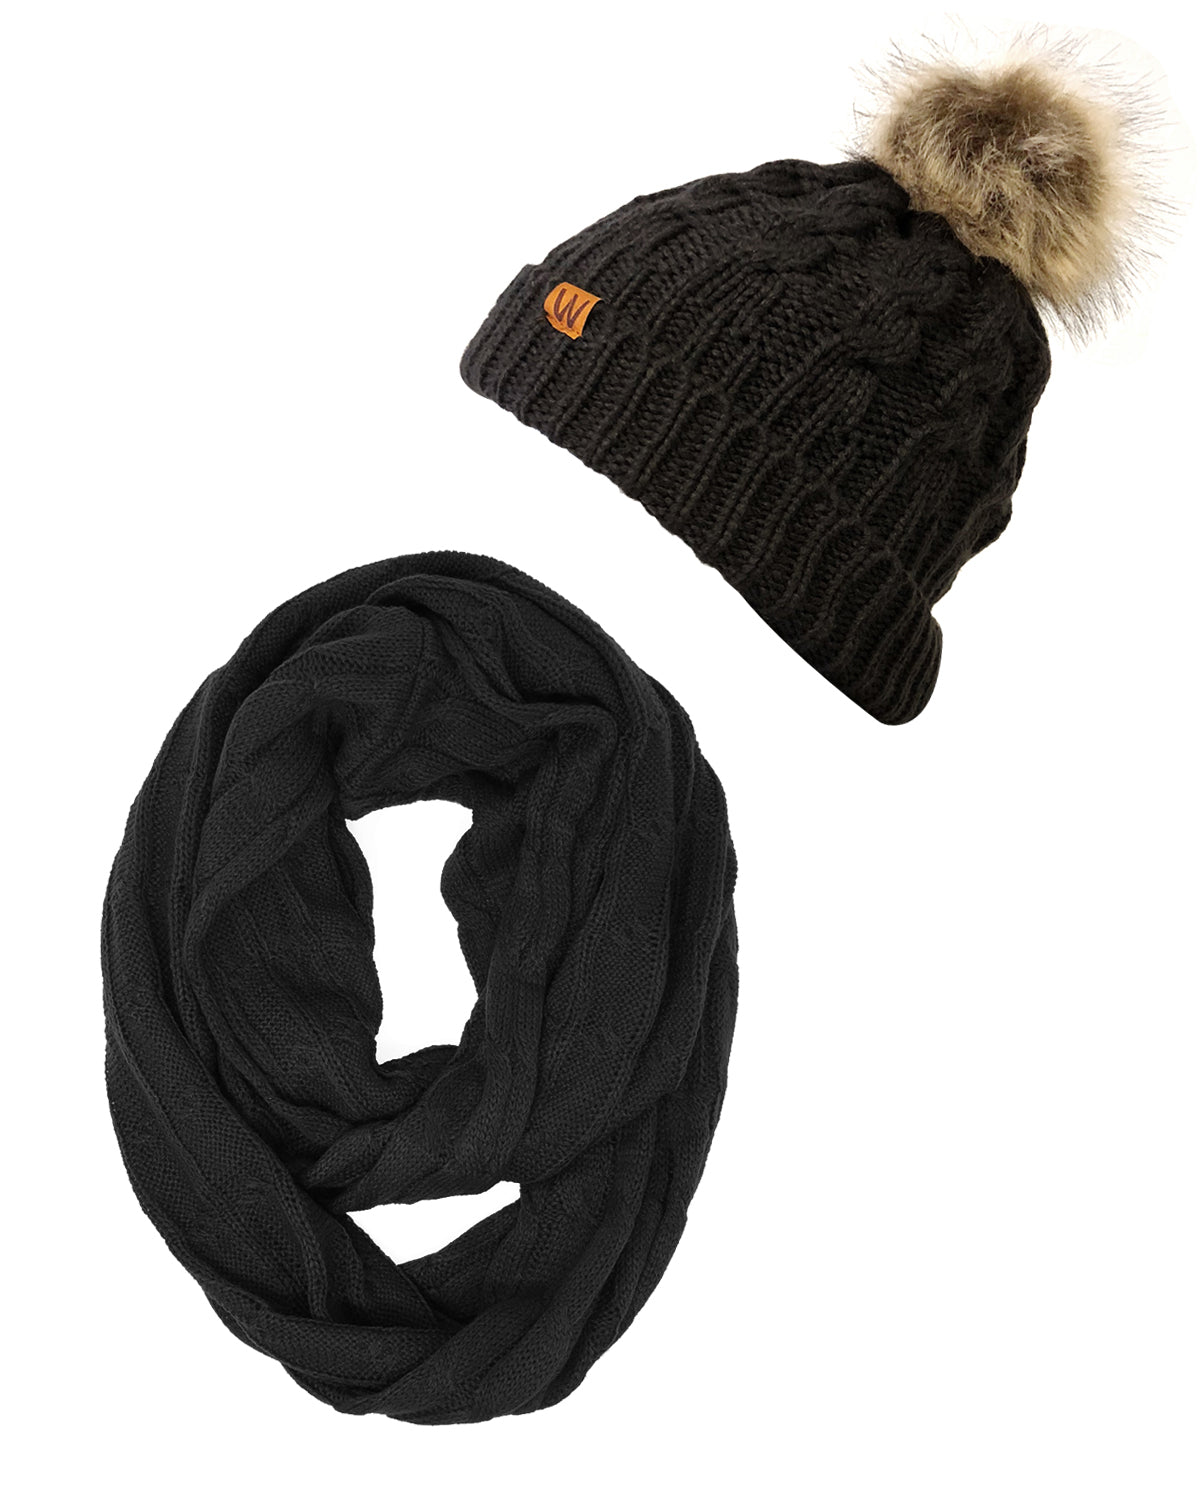 Wrapables Winter Warm Cable Knit Infinity Scarf and Faux Fur Pom Pom Beanie Set